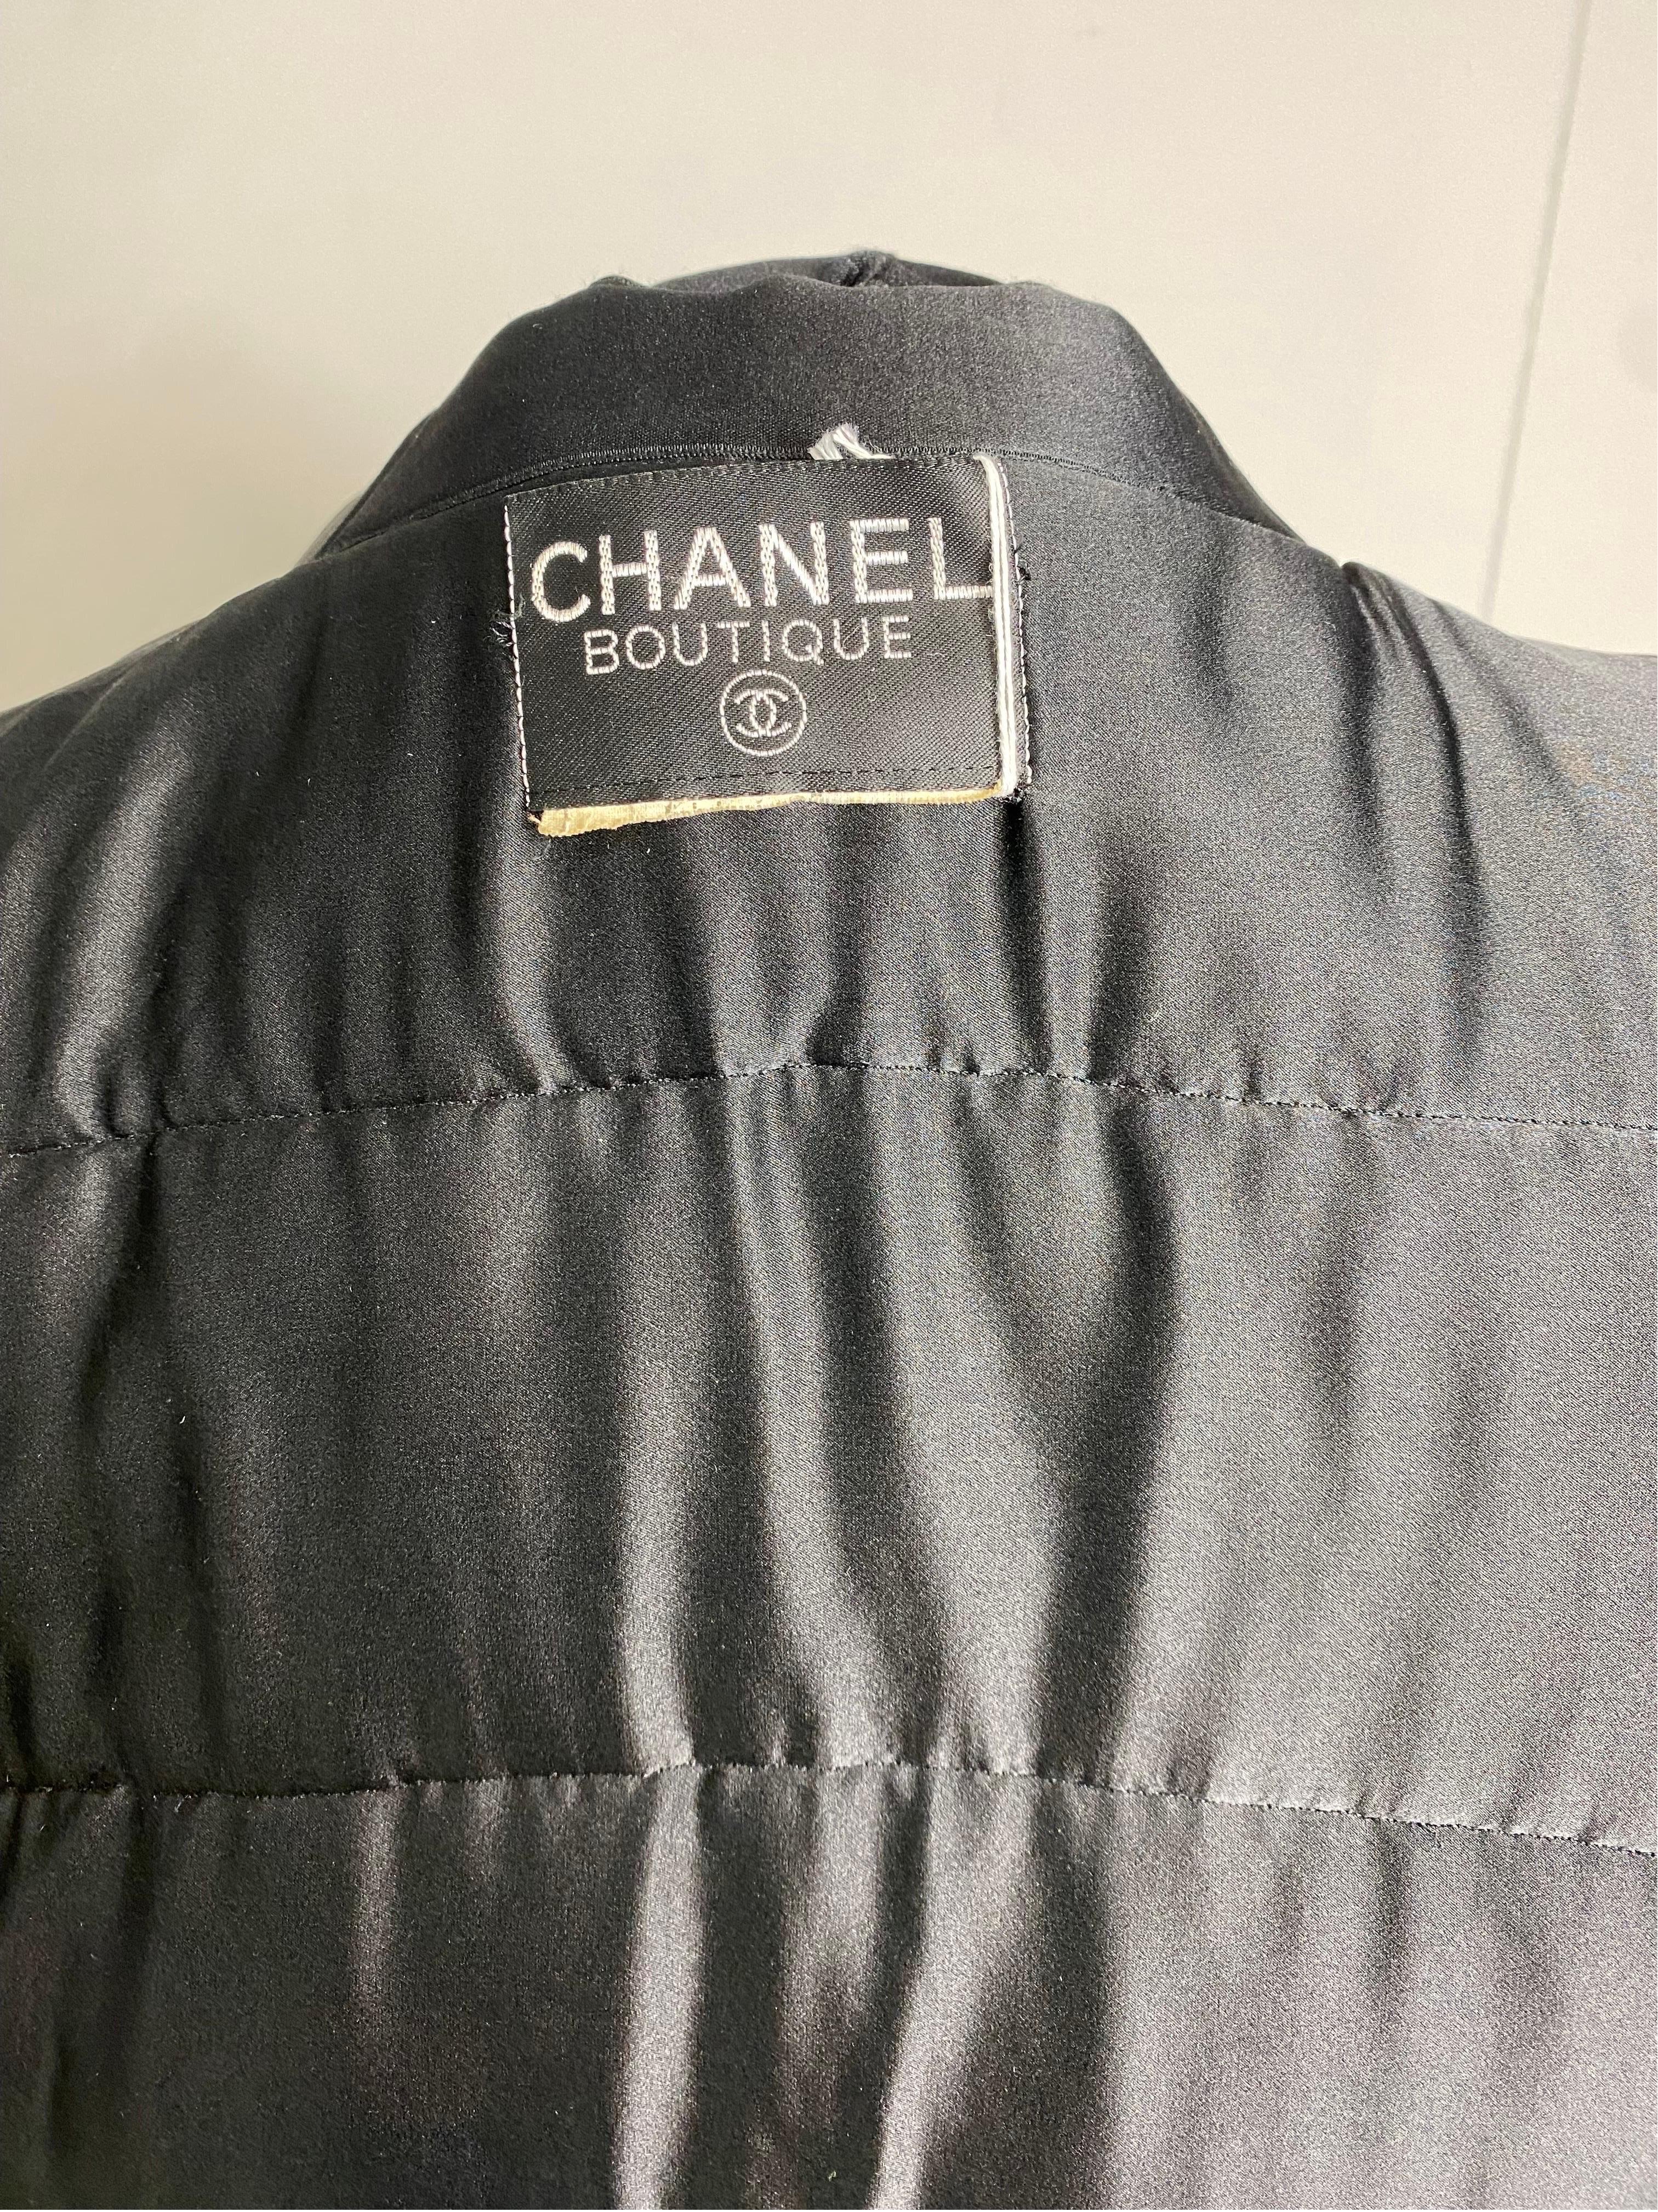 Chanel Boutique 1990/91 vintage quilted electric blue bomber jacket For Sale 4